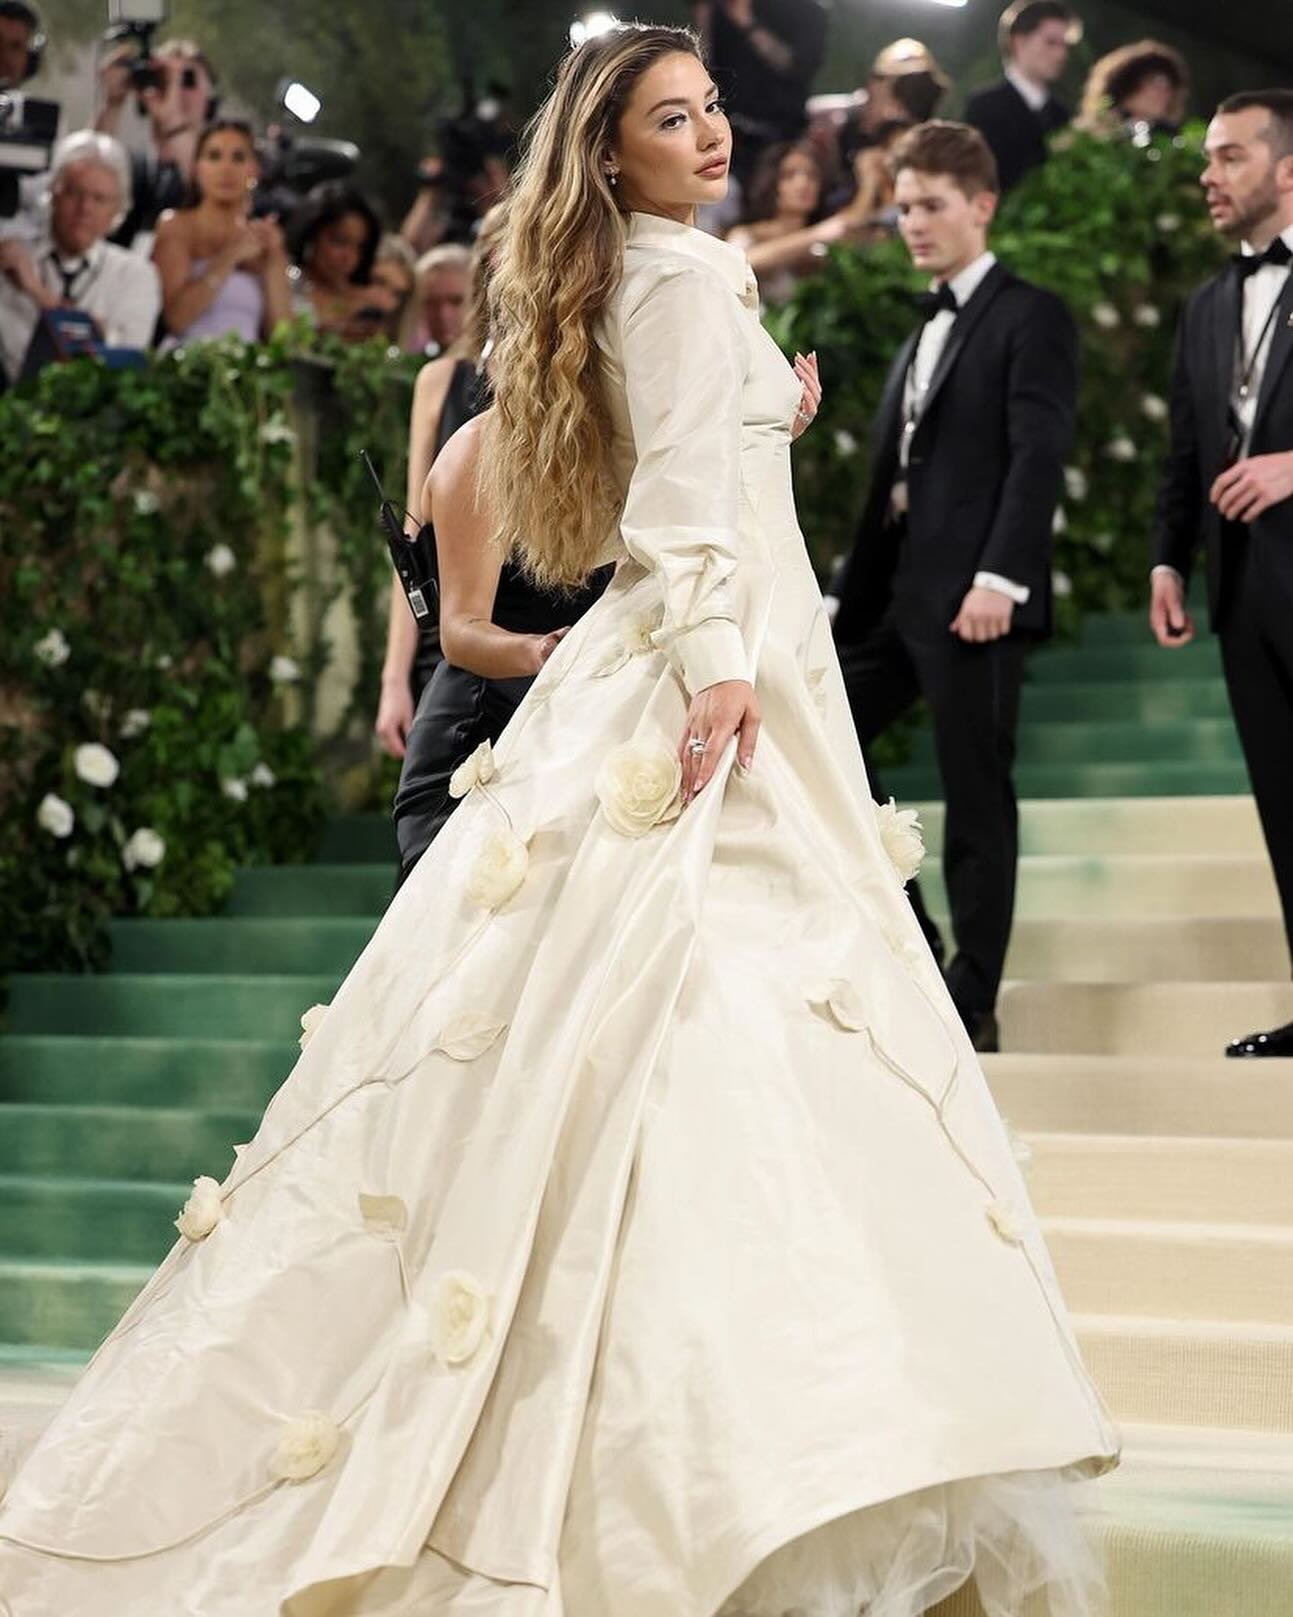 The #metagala was another inspiring night of #fashion but of course our eyes went to the gowns that could have been worn on another night we all know and love. Here are our top 10 #bridalfashion favorites, tell us which one will inspire your aisle lo